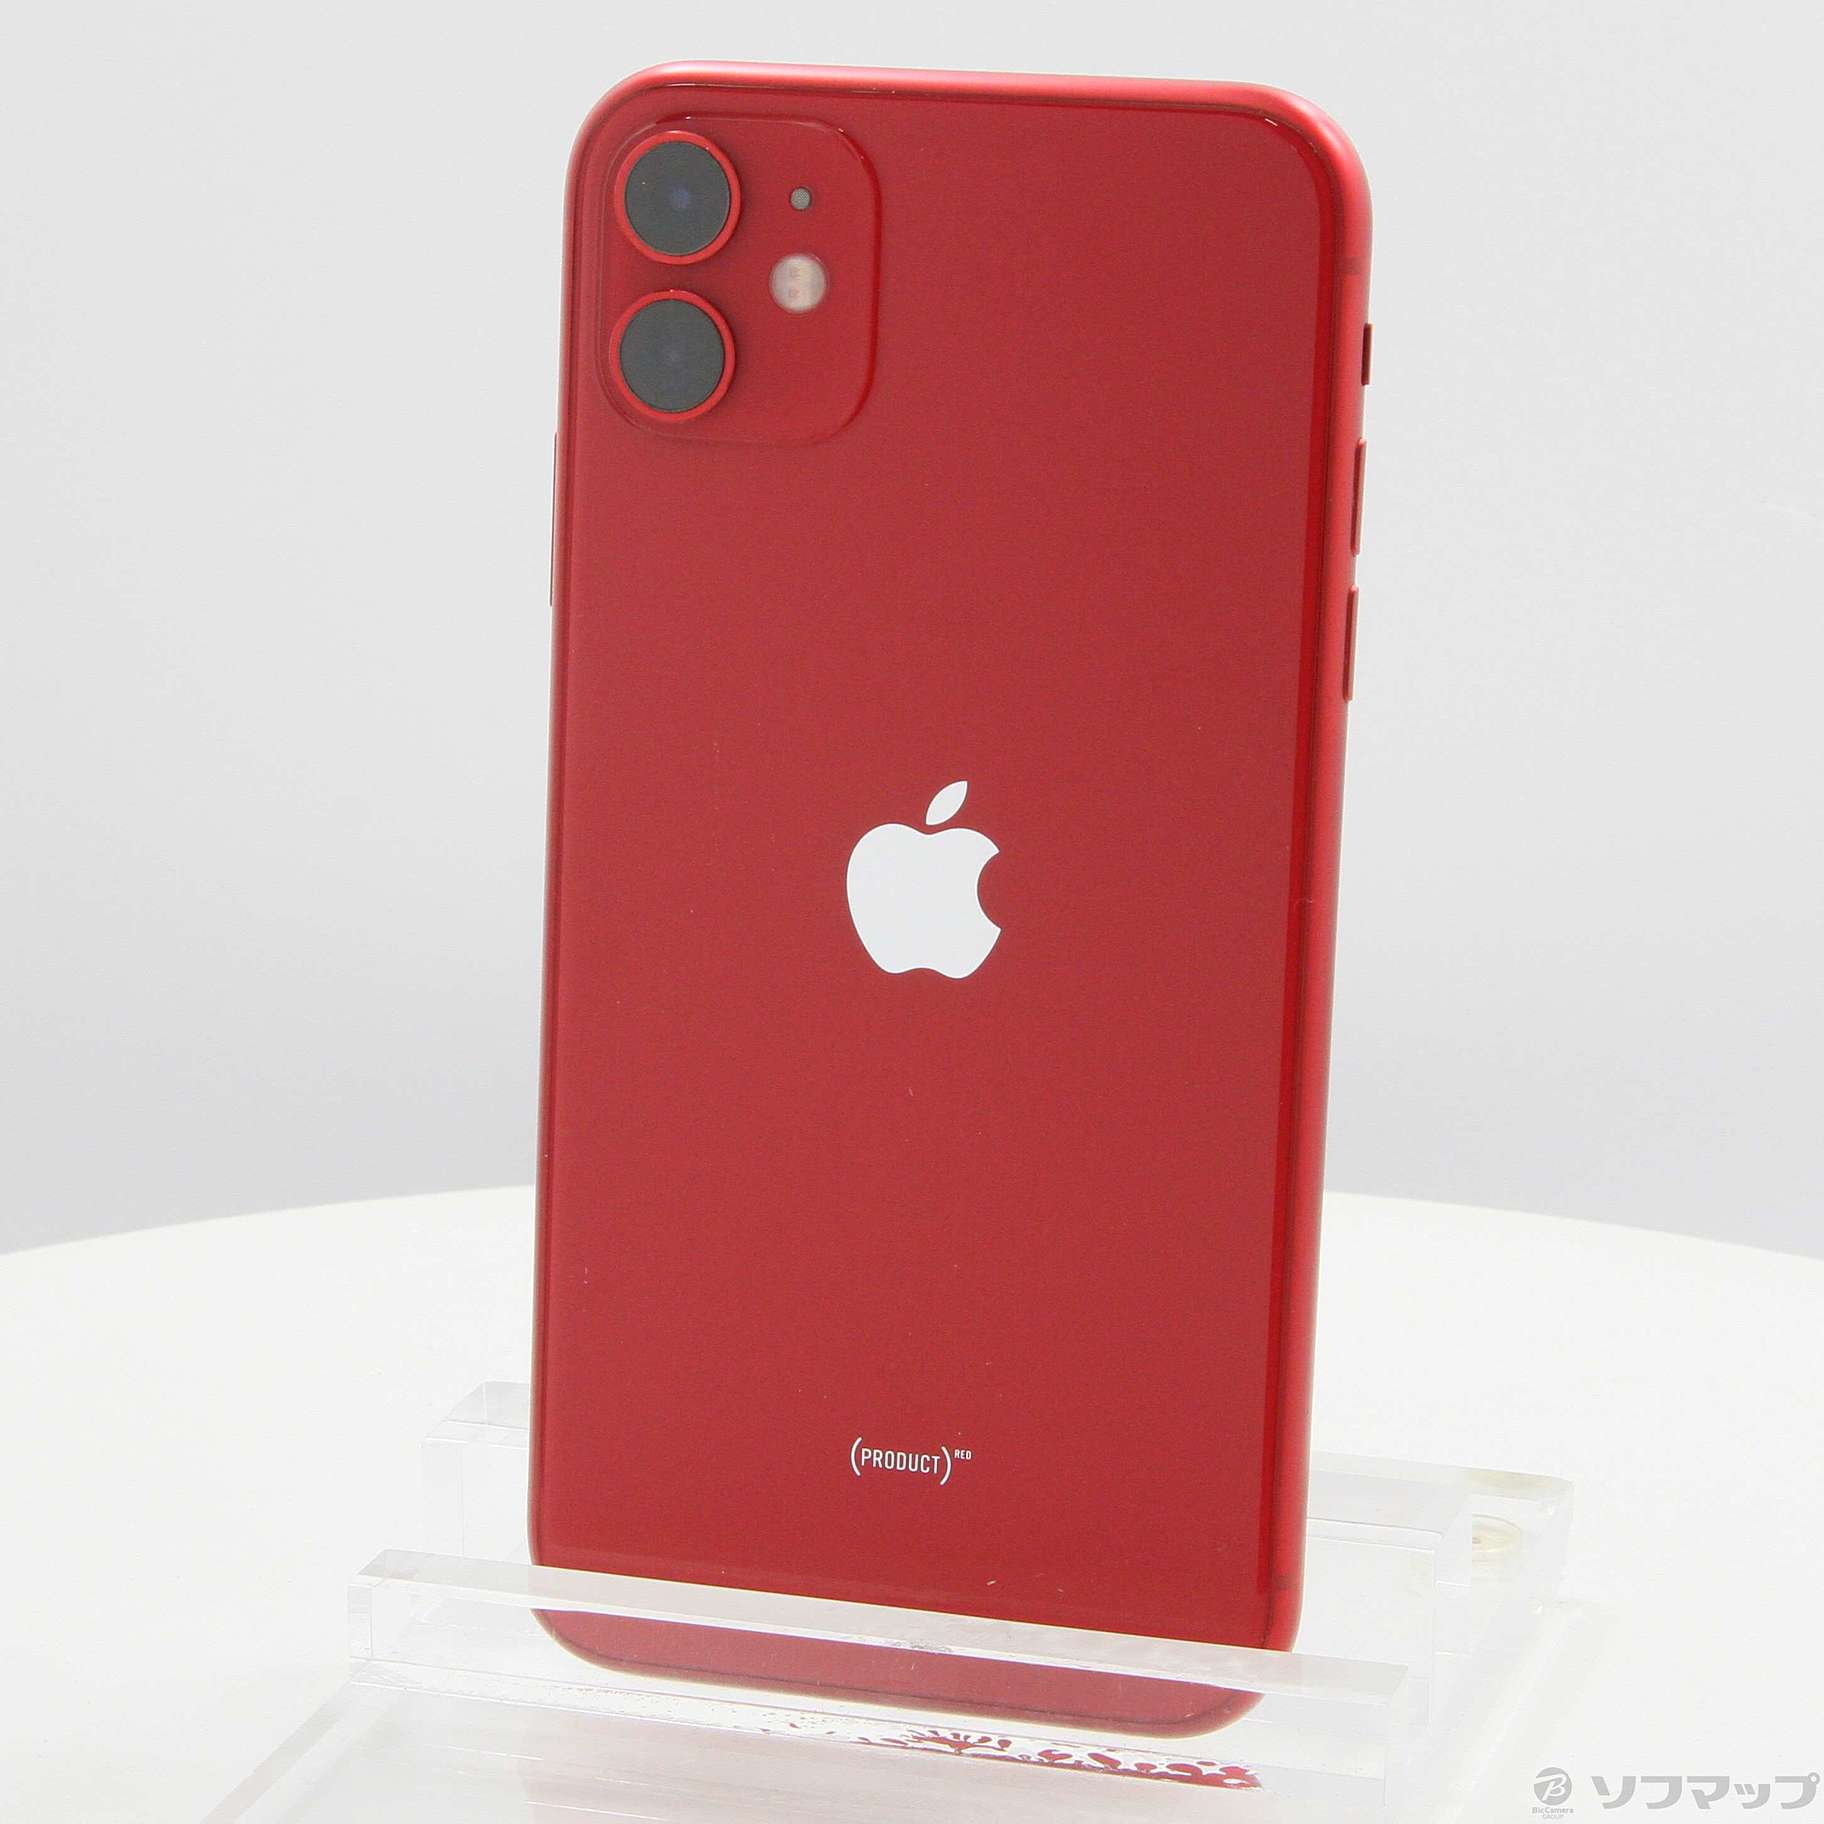 iPhone11 PRODUCT RED 64GB